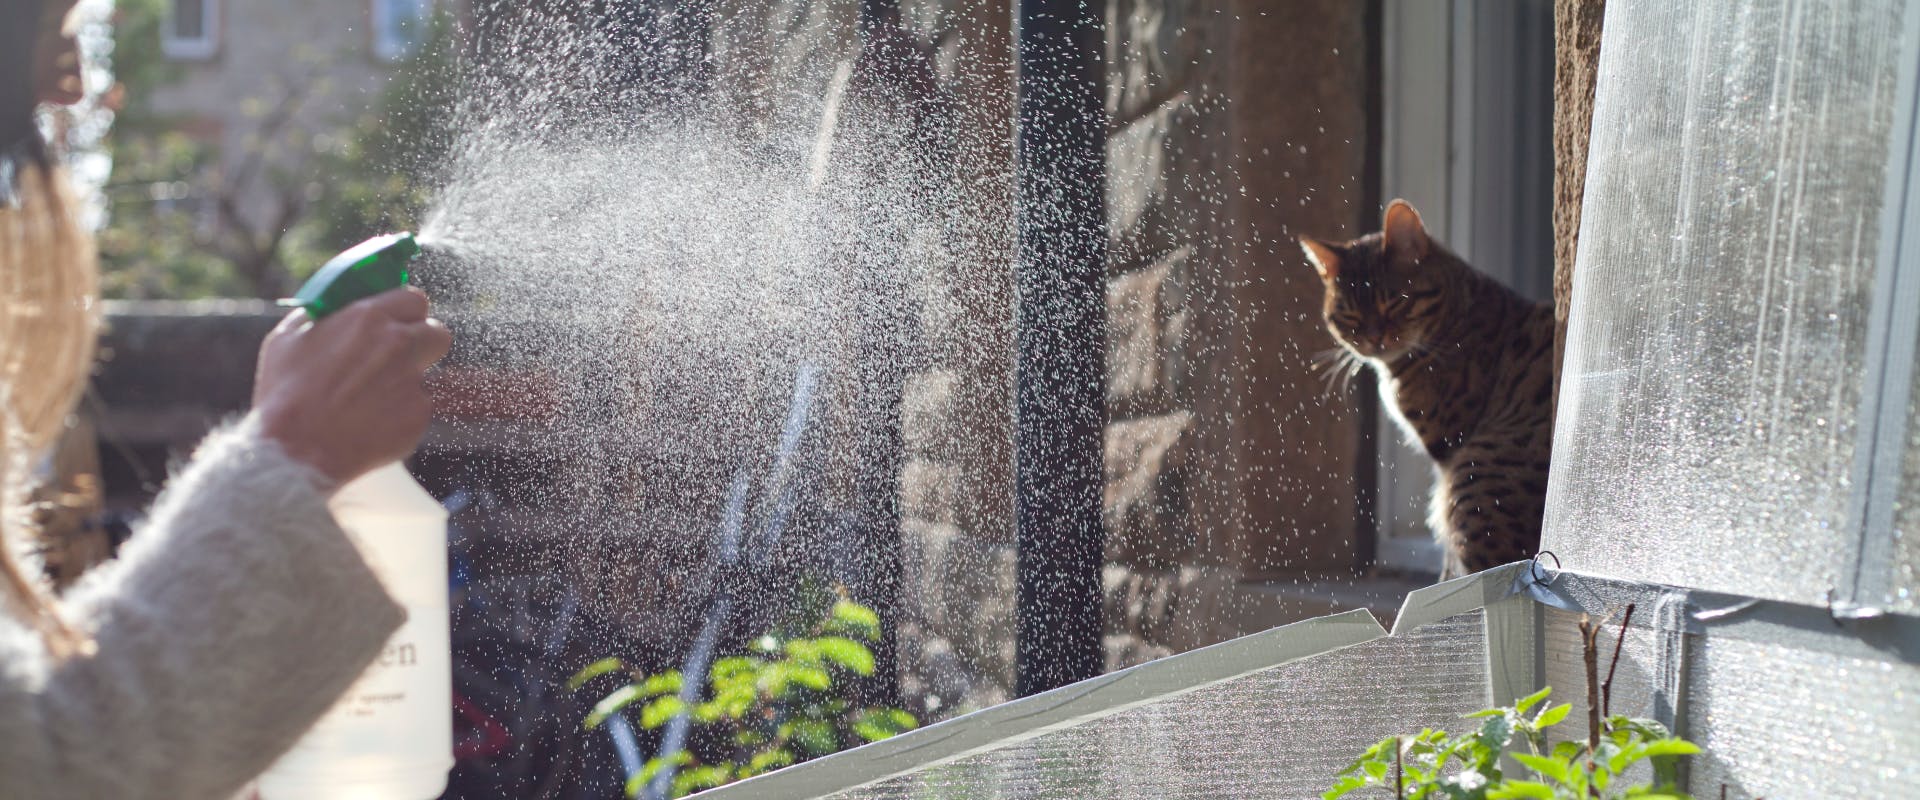 a cat looking out of a window at a person using a spray bottle on their plants